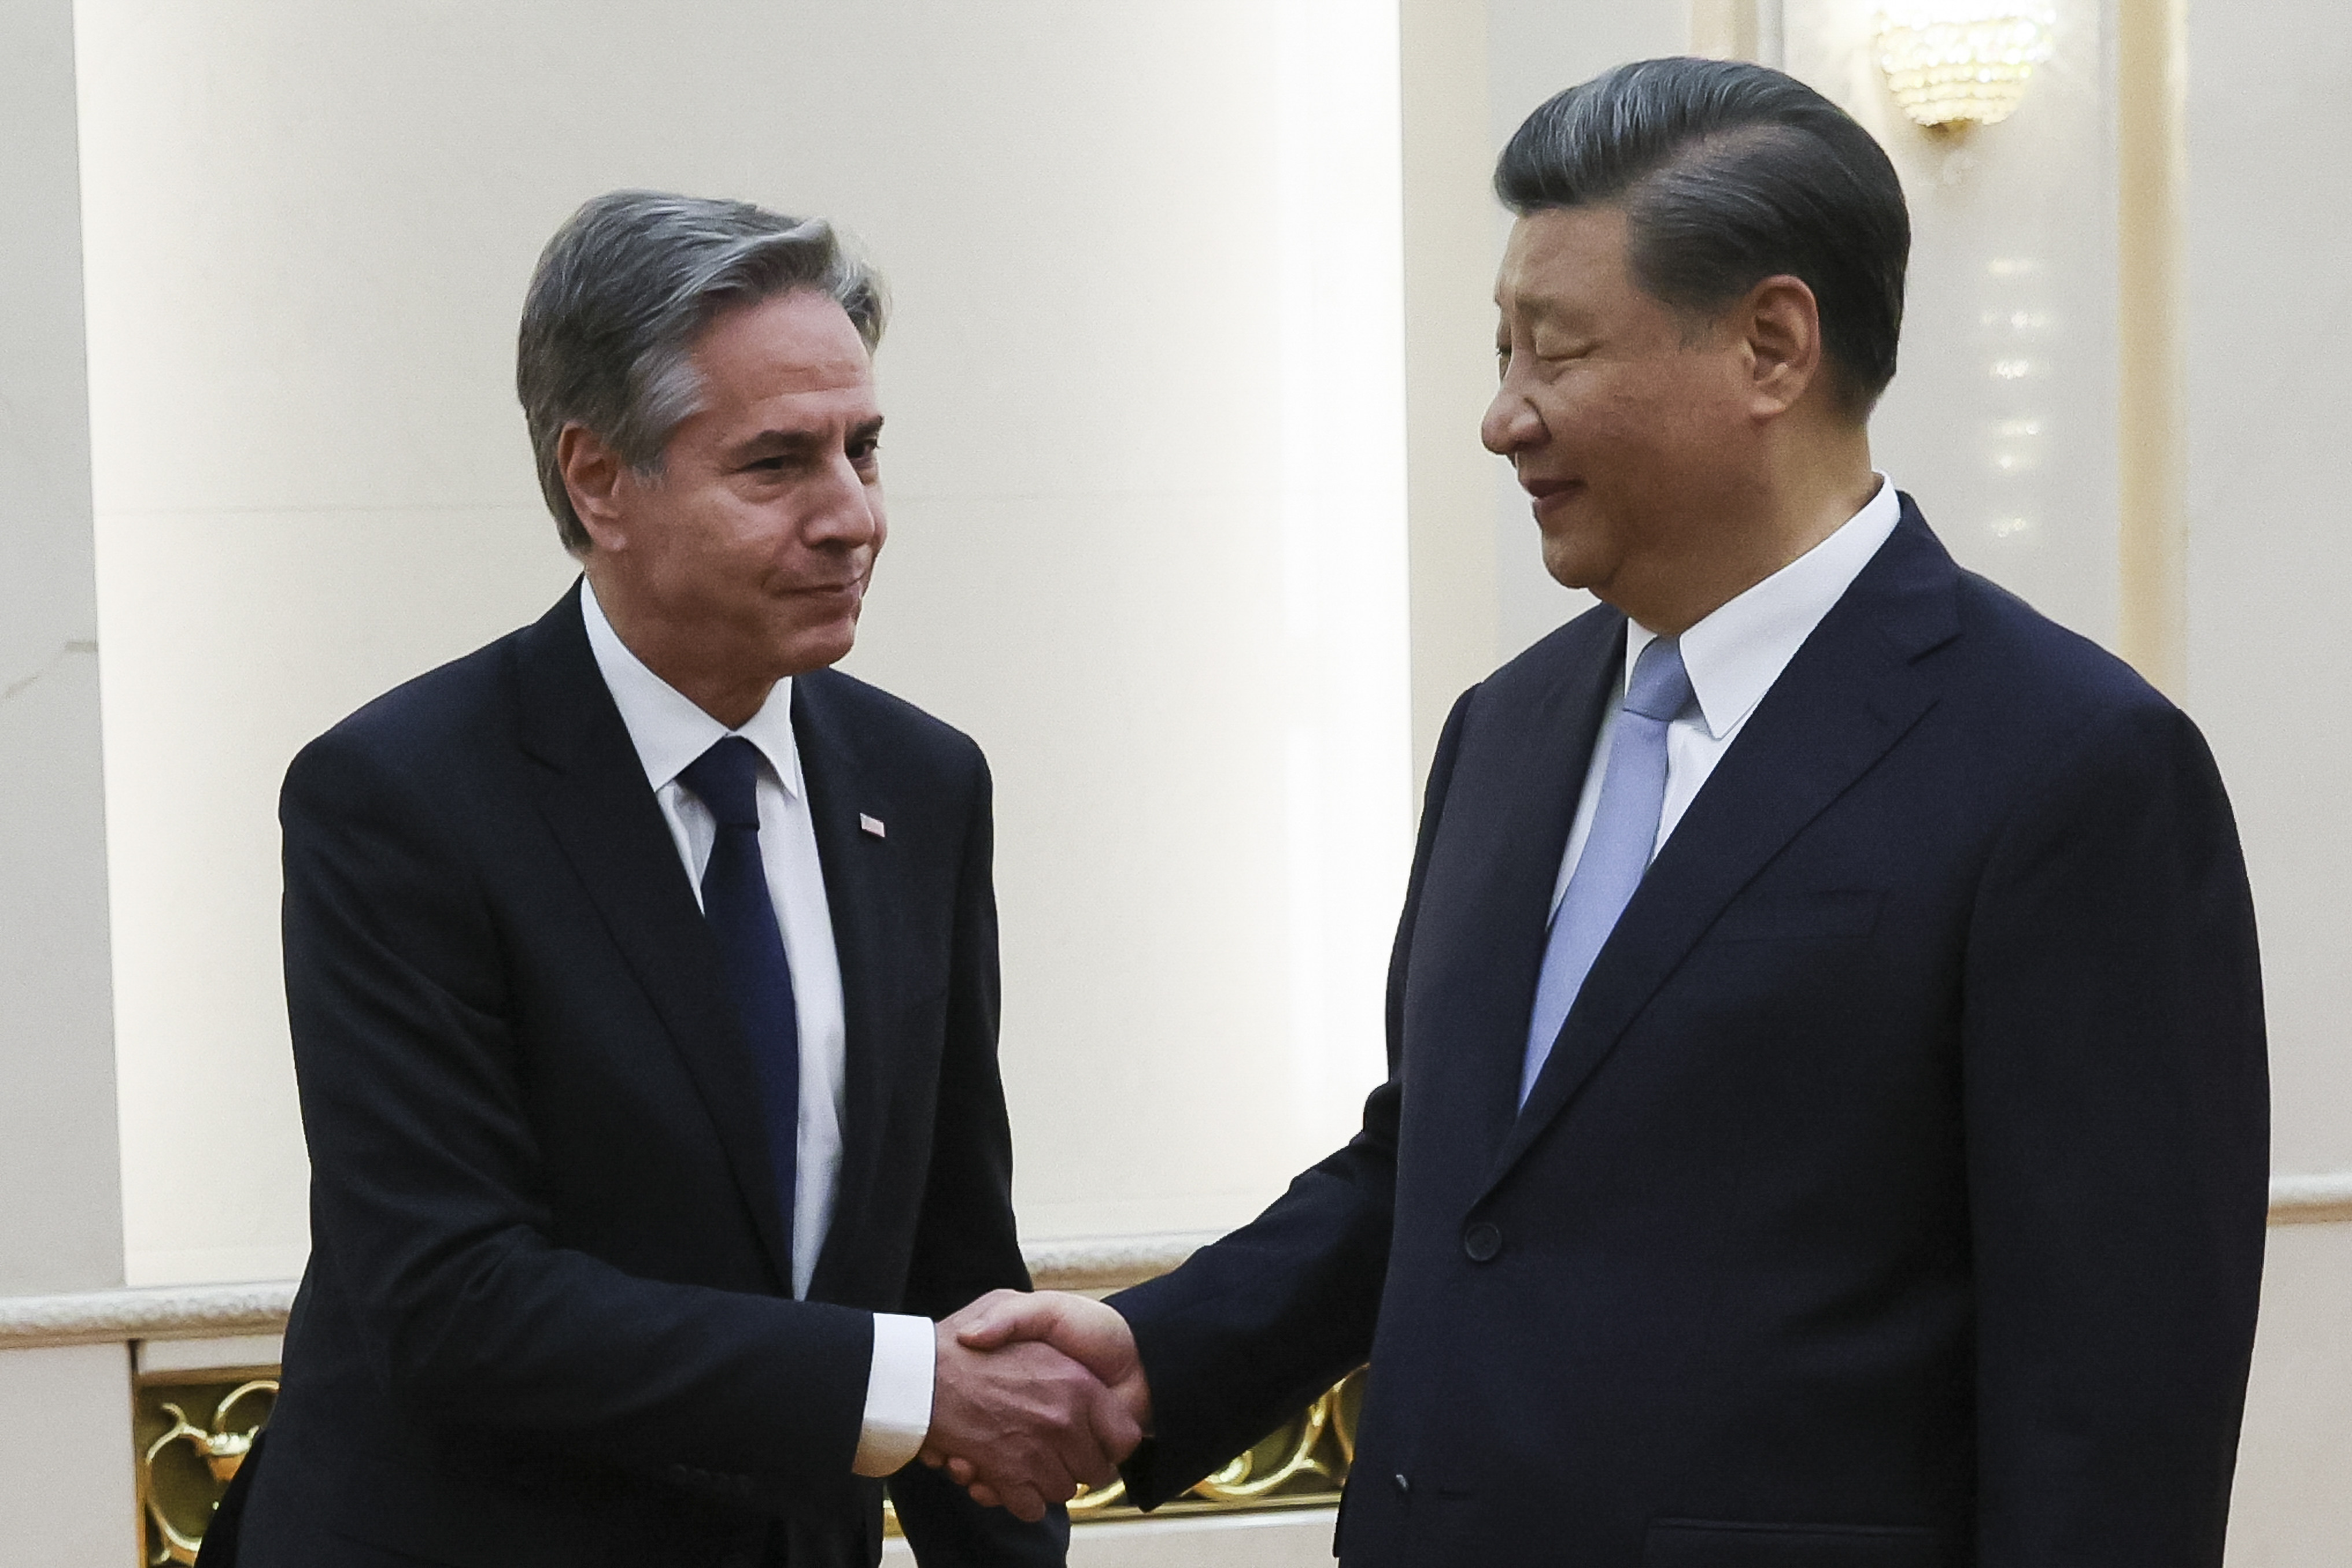 US Secretary of State Antony Blinken shakes hands with Chinese President Xi Jinping in the Great Hall of the People in Beijing, China, on June 19, 2023. Photo: AP